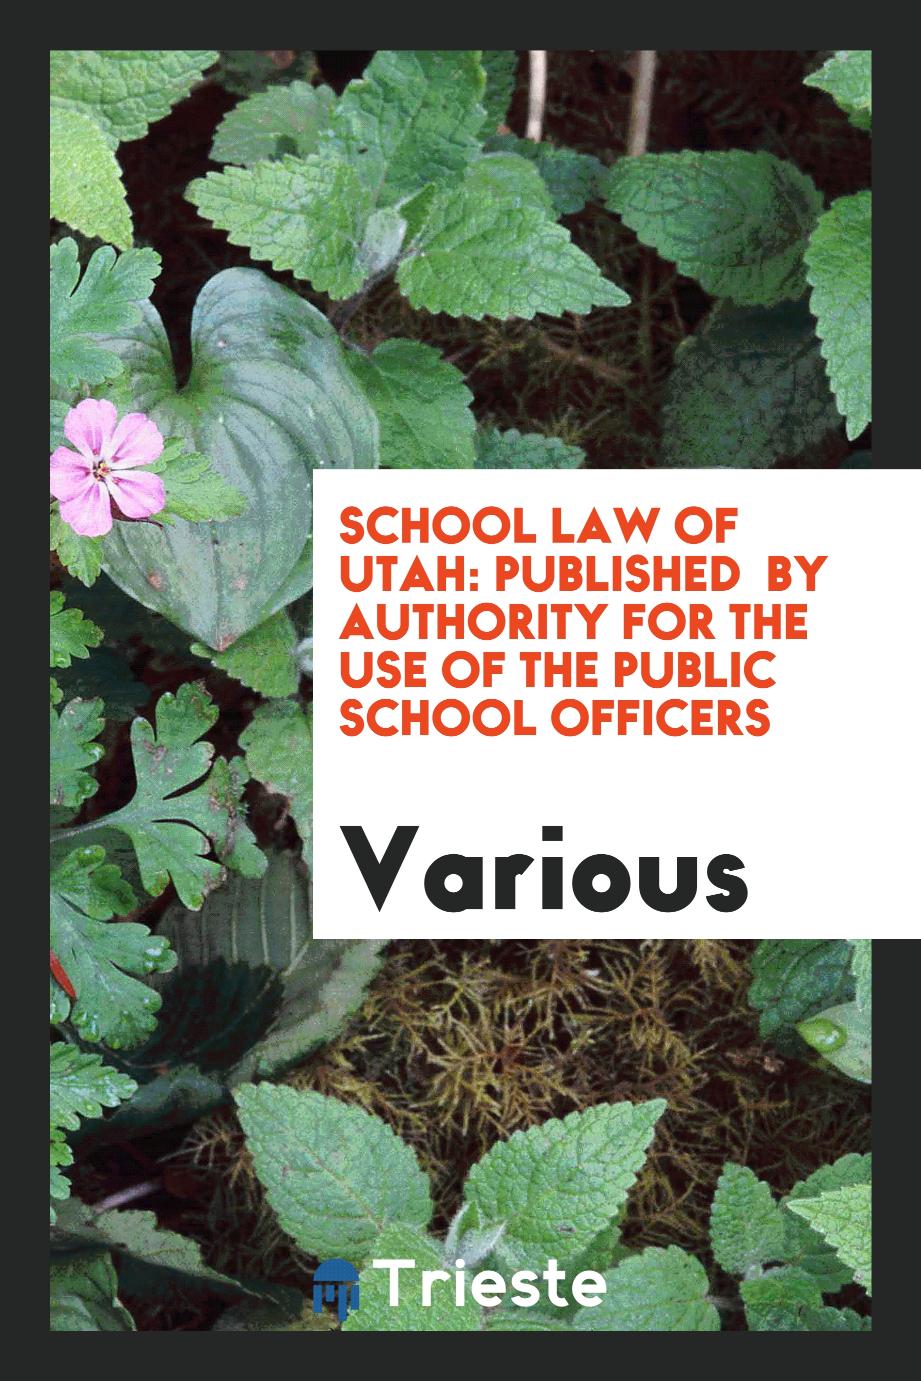 School Law of Utah: Published by Authority for the Use of the Public School Officers